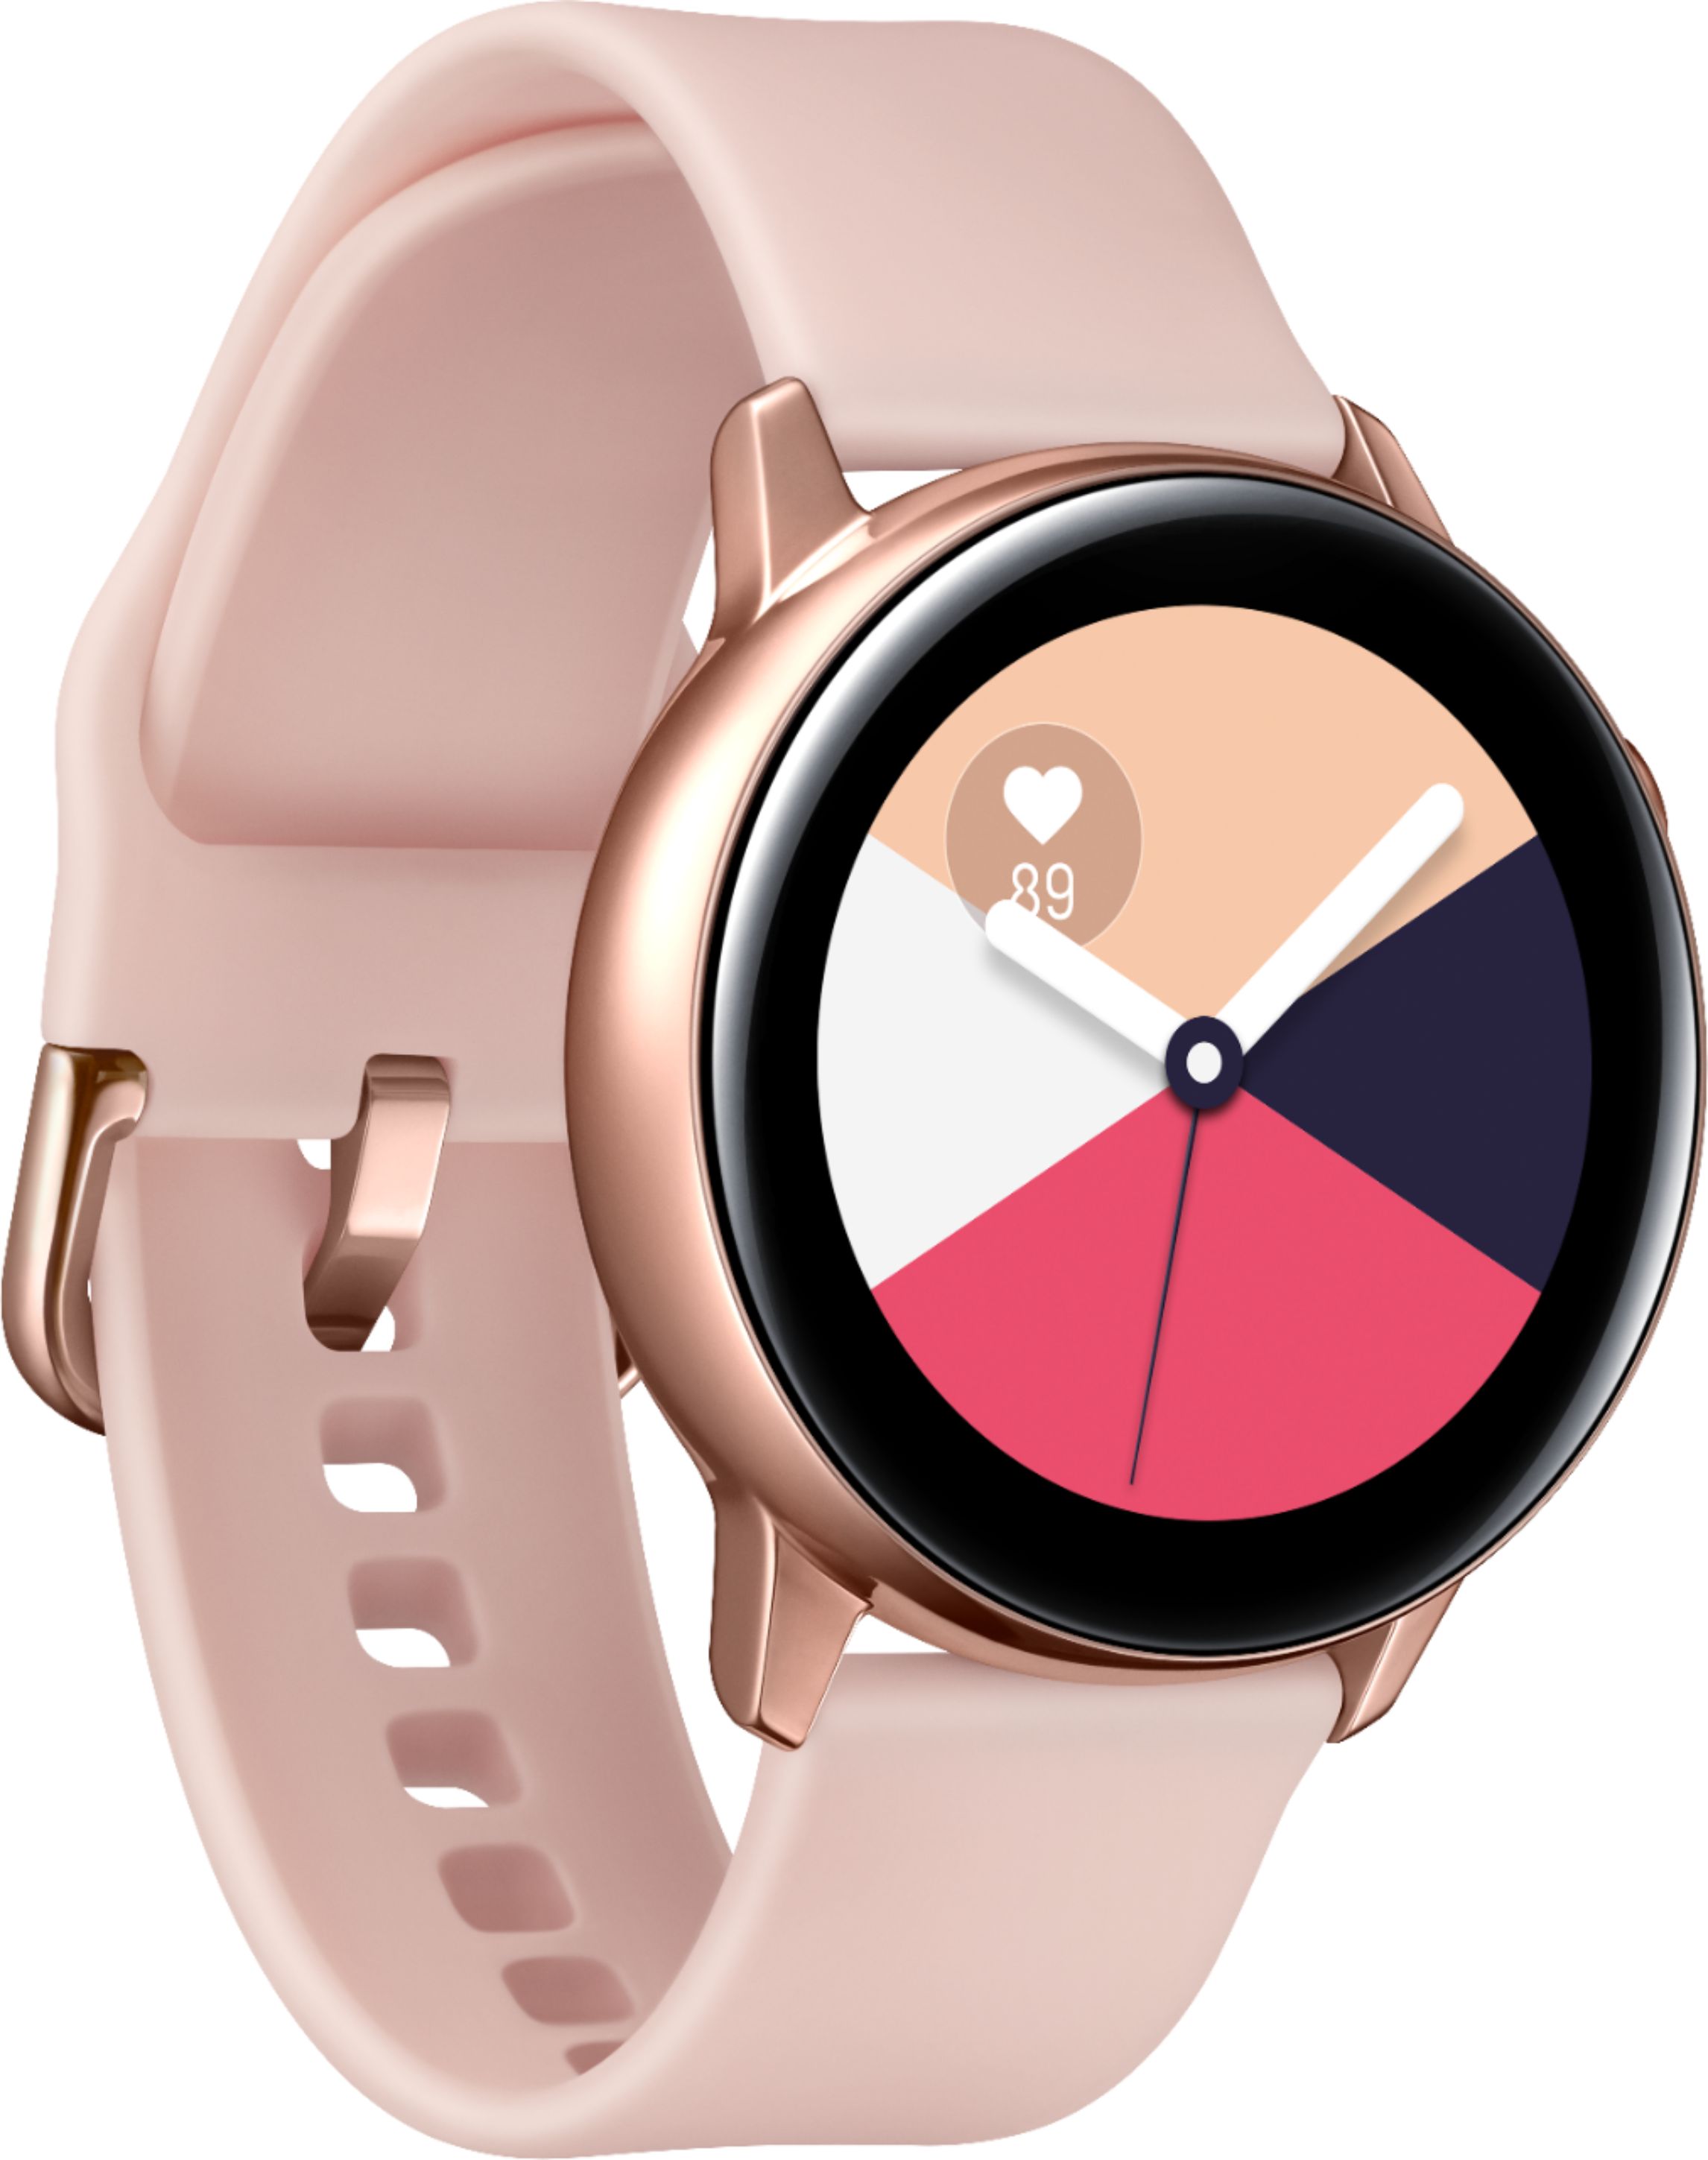 Angle View: Samsung - Geek Squad Certified Refurbished Galaxy Watch Active Smartwatch 40mm Aluminium - Rose Gold